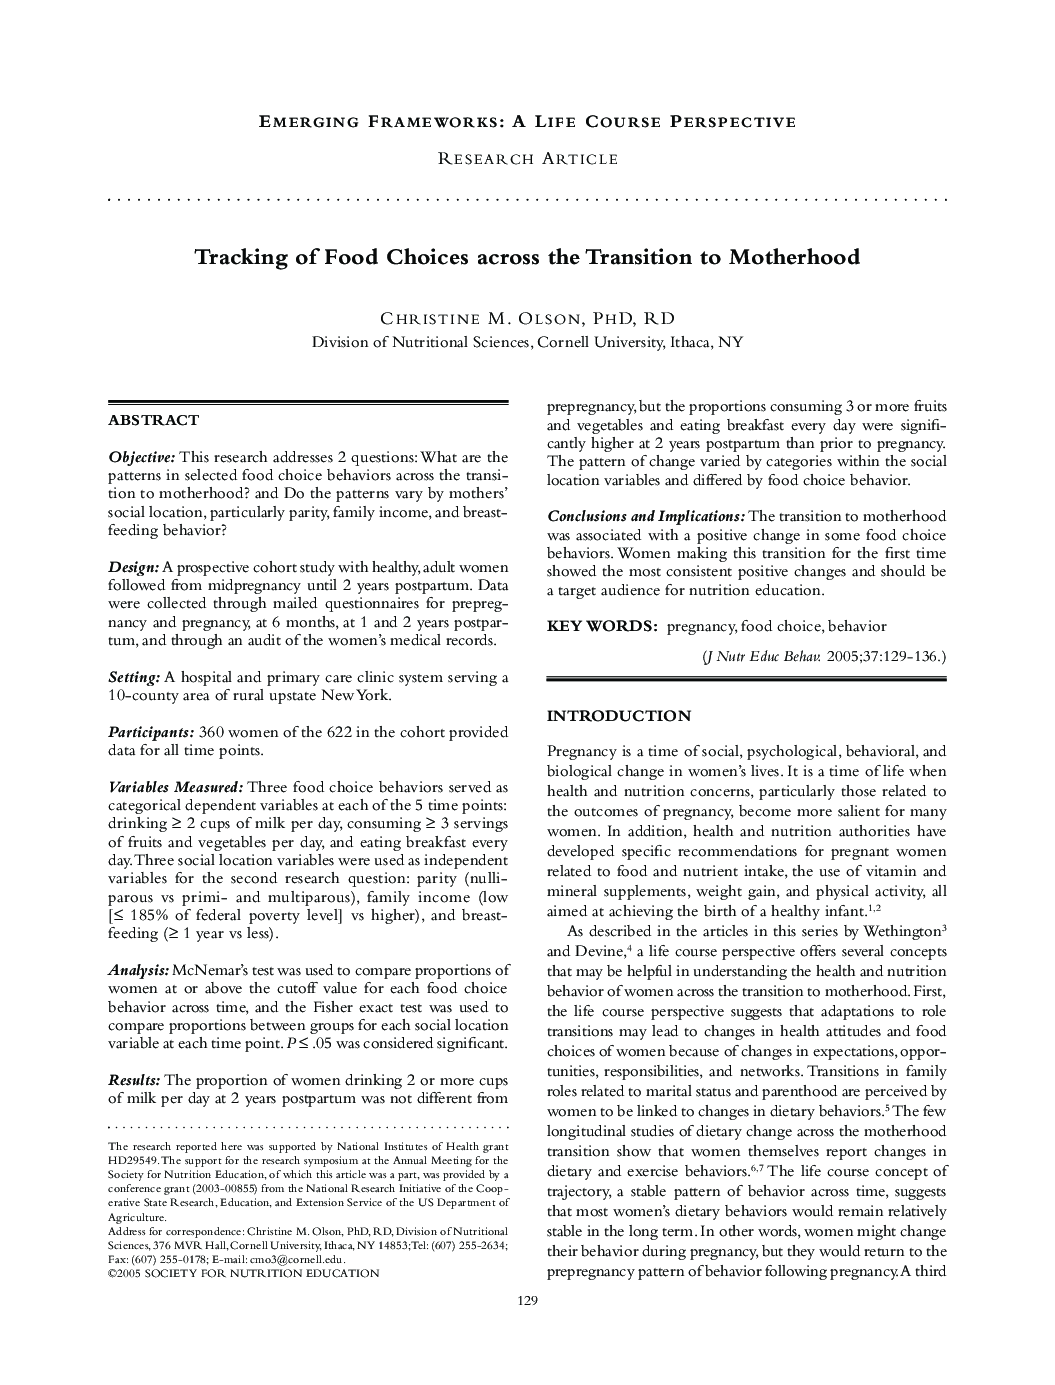 Tracking of Food Choices across the Transition to Motherhood